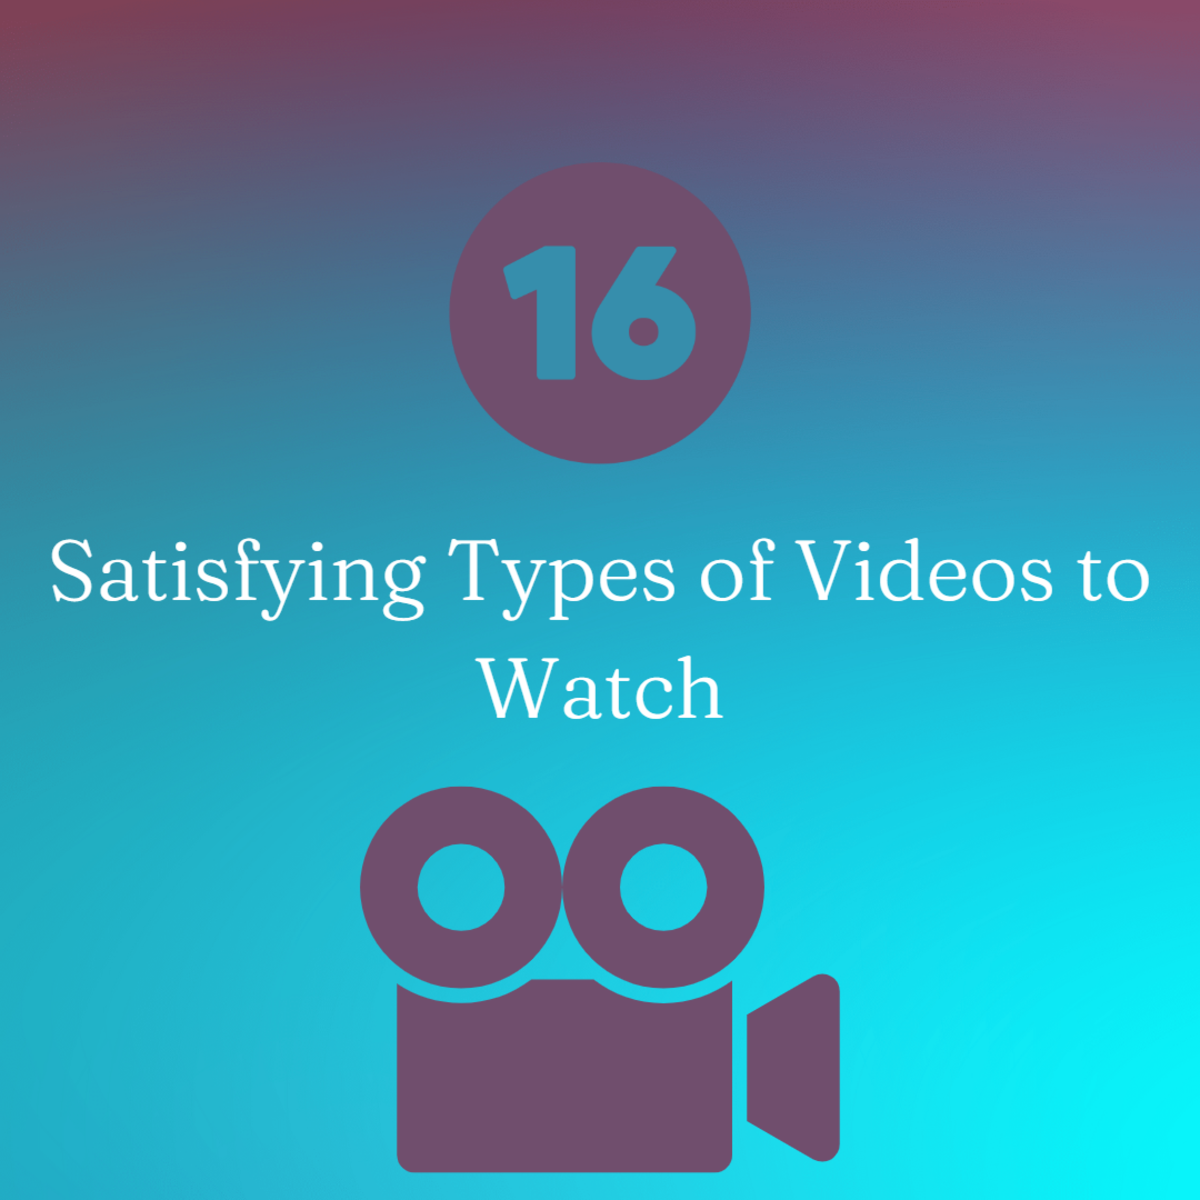 The 16 Most Satisfying Types of Videos to Watch